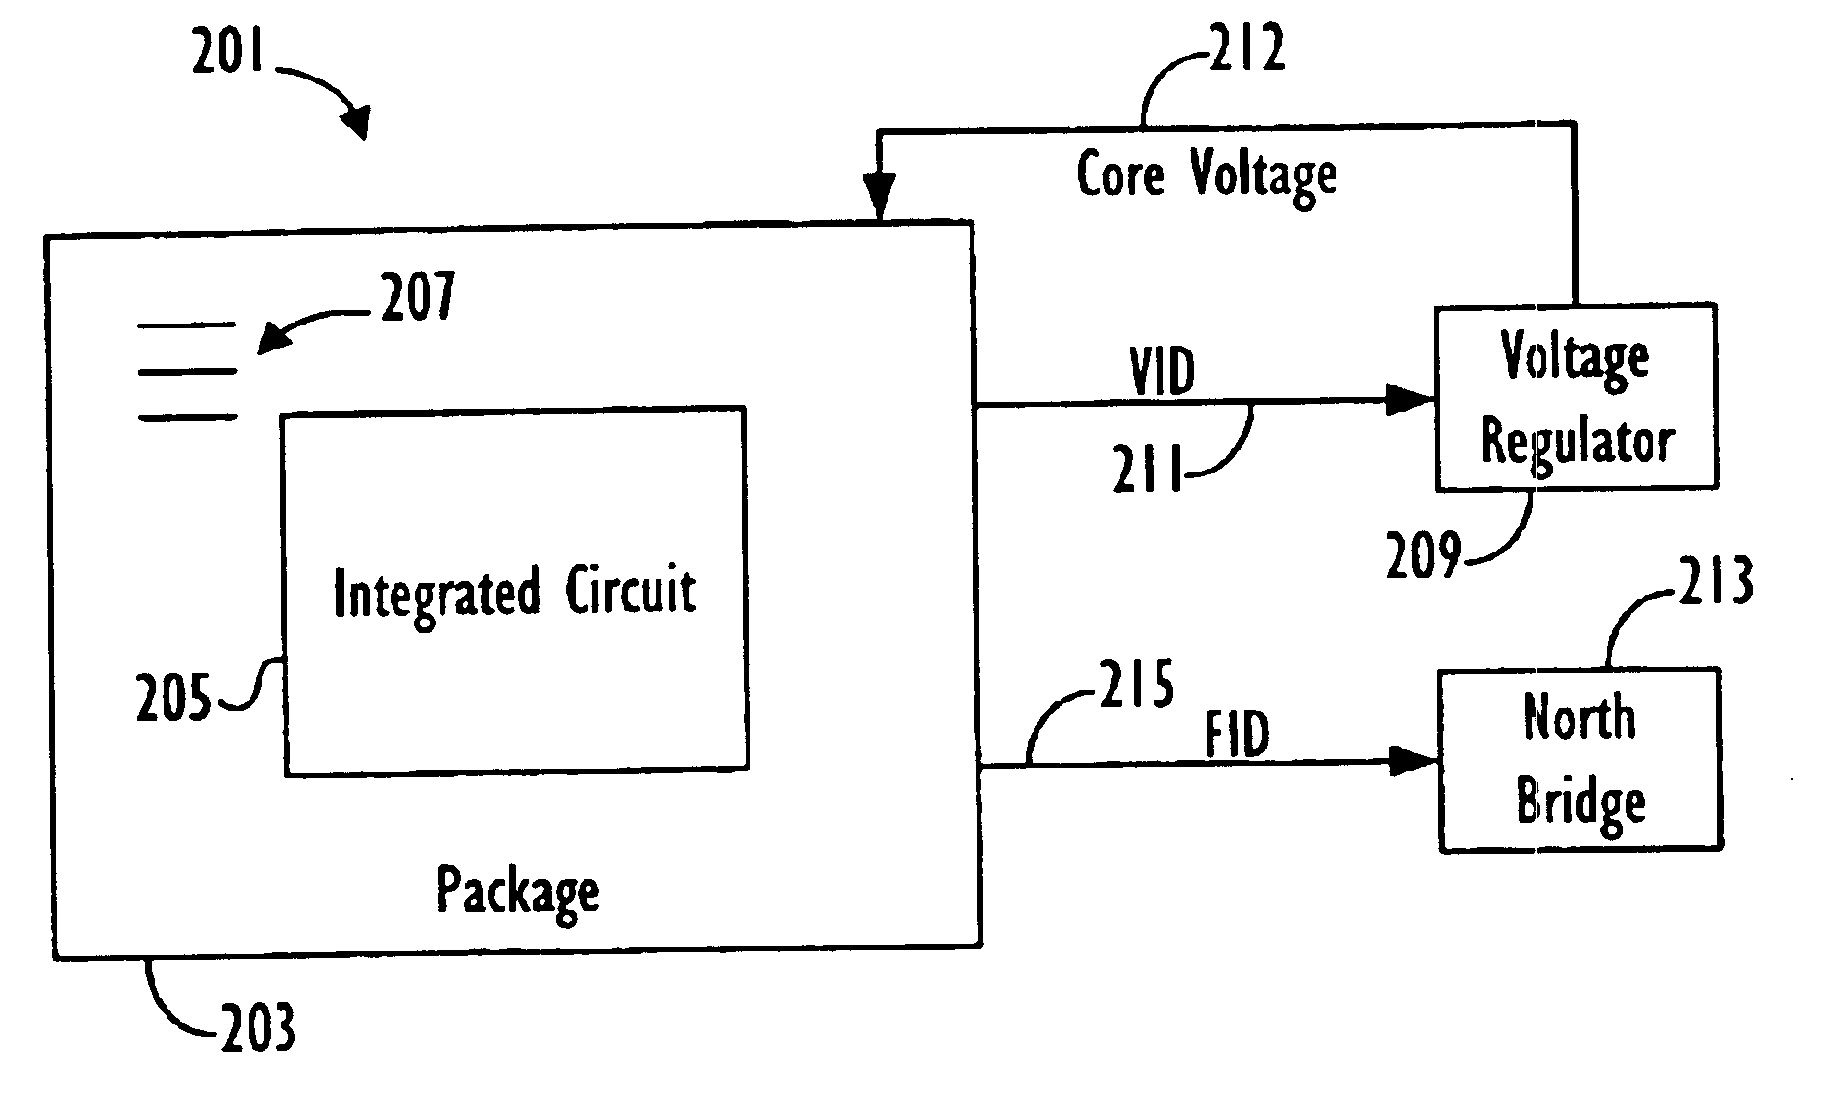 Integrated circuit package incorporating programmable elements